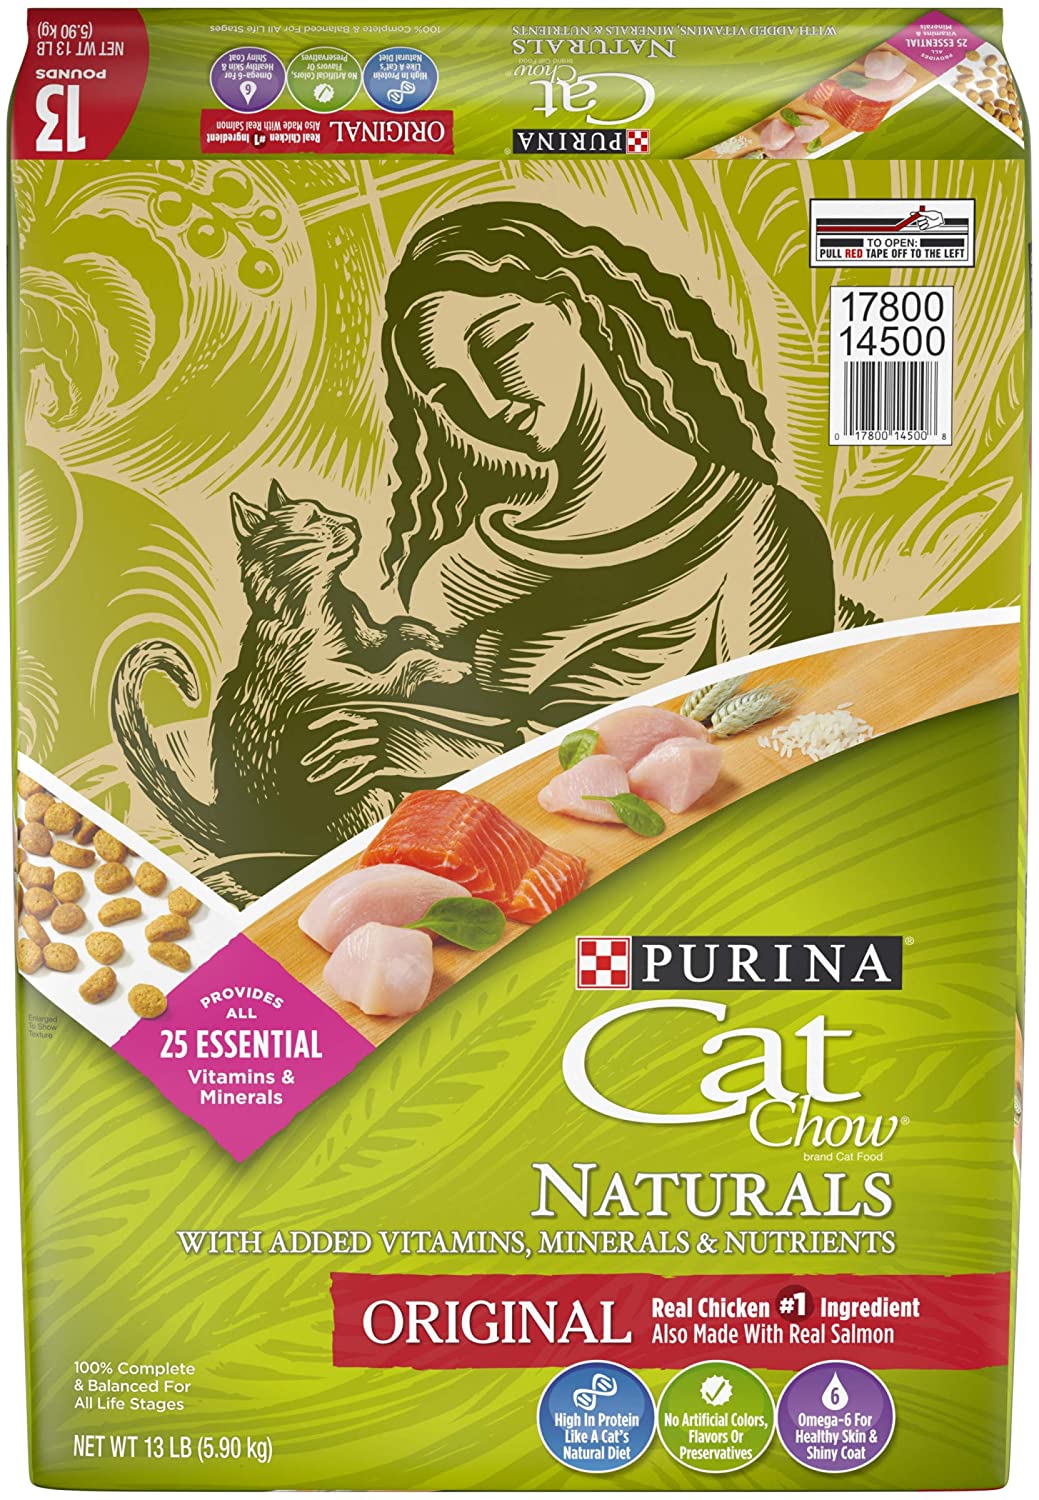 Purina Cat Chow Naturals Original With Real Chicken & Salmon Adult Dry Cat Food